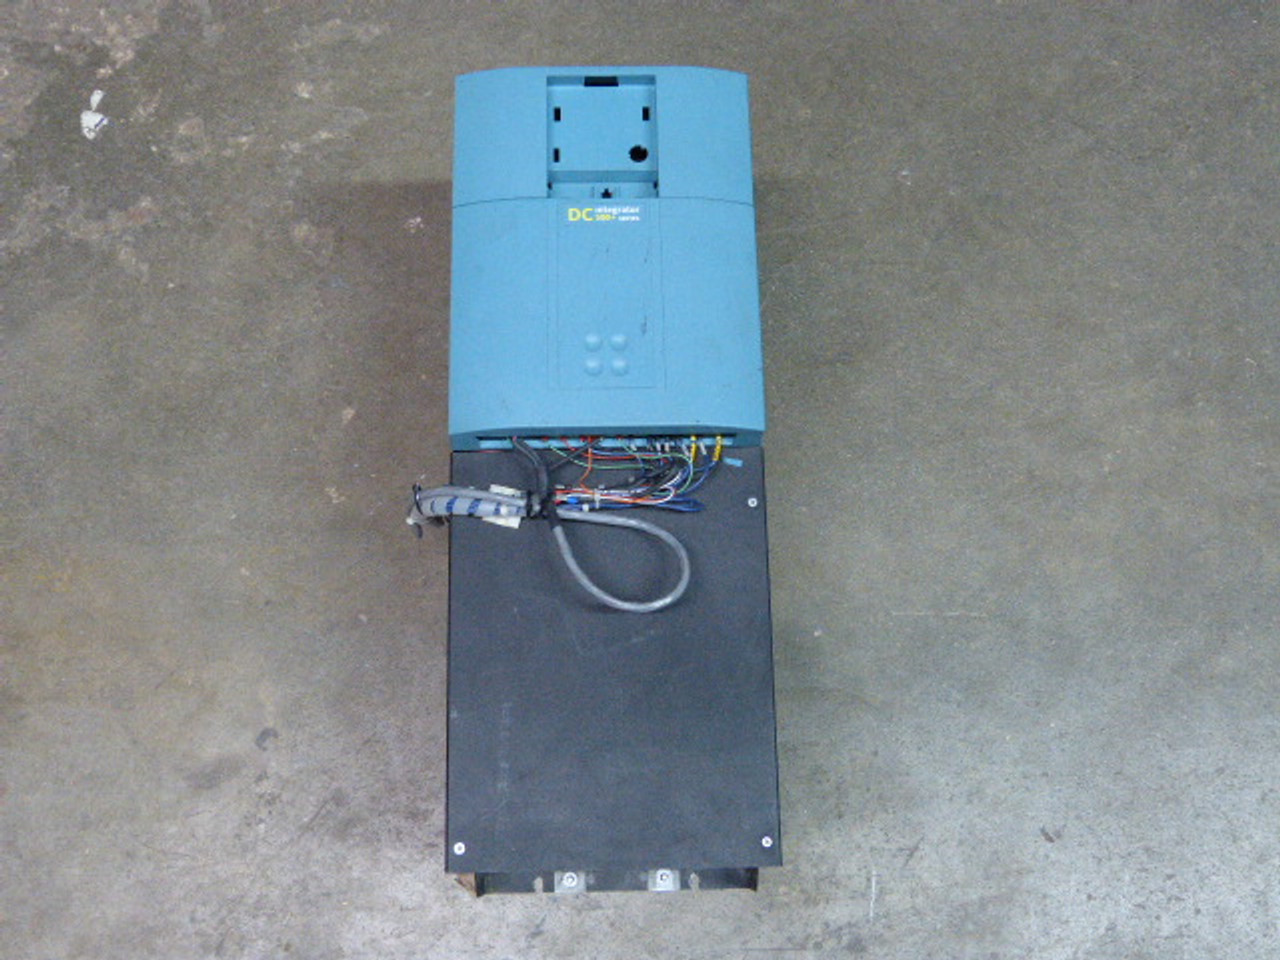 Eurotherm 591??? Non-Regenerative DC Chassis Controller 3Ph 230-460V USED